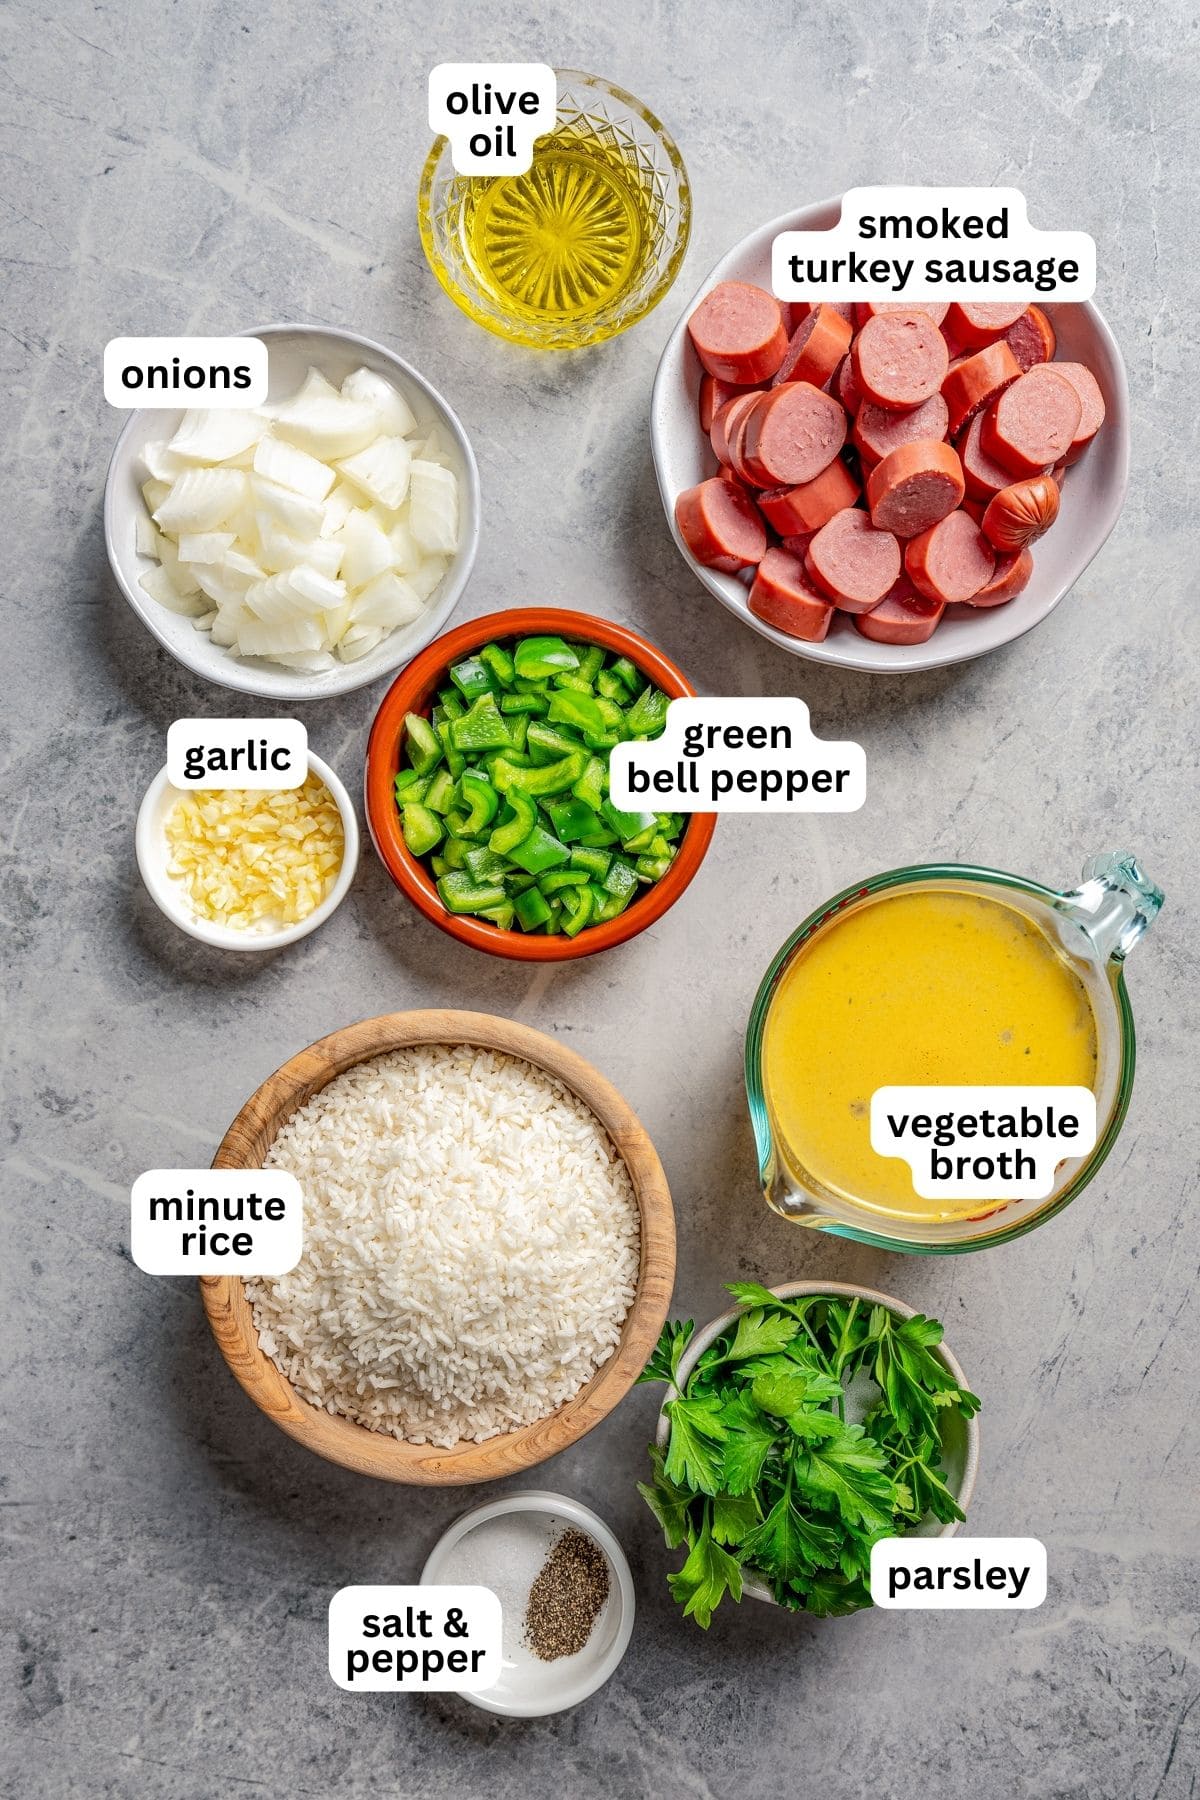 Overhead image of the ingredients used to make Sausage and Rice.